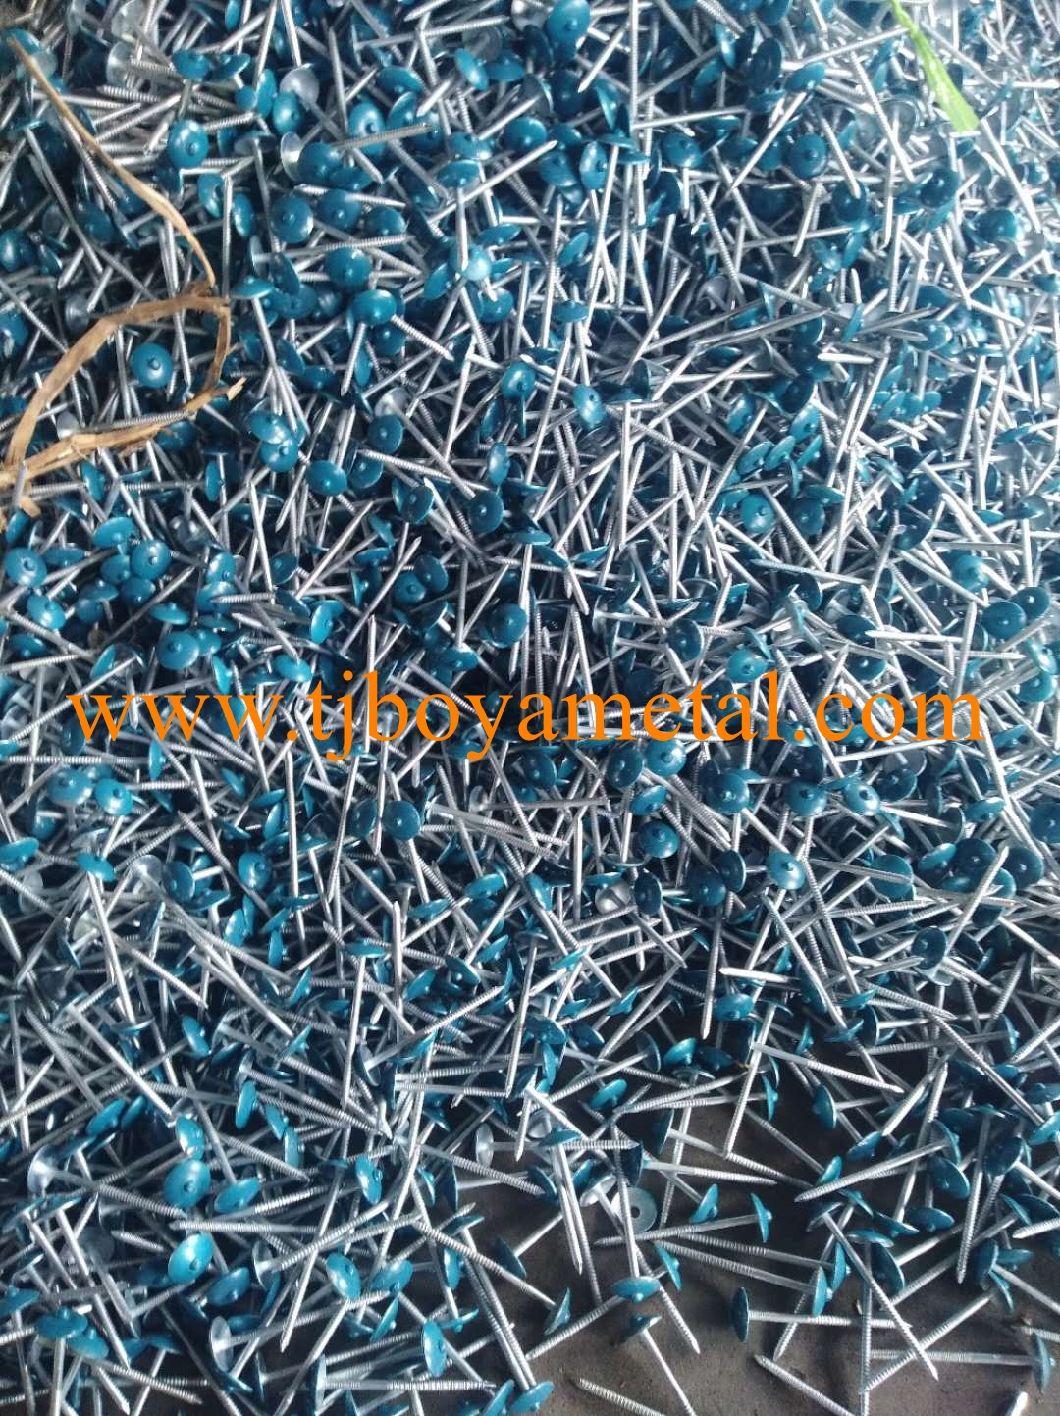 Direct Factory Supply Galvanized Corrugated Sheet Nails/Hot Sale Twisted Shank Umbrella Head Roofing Nails